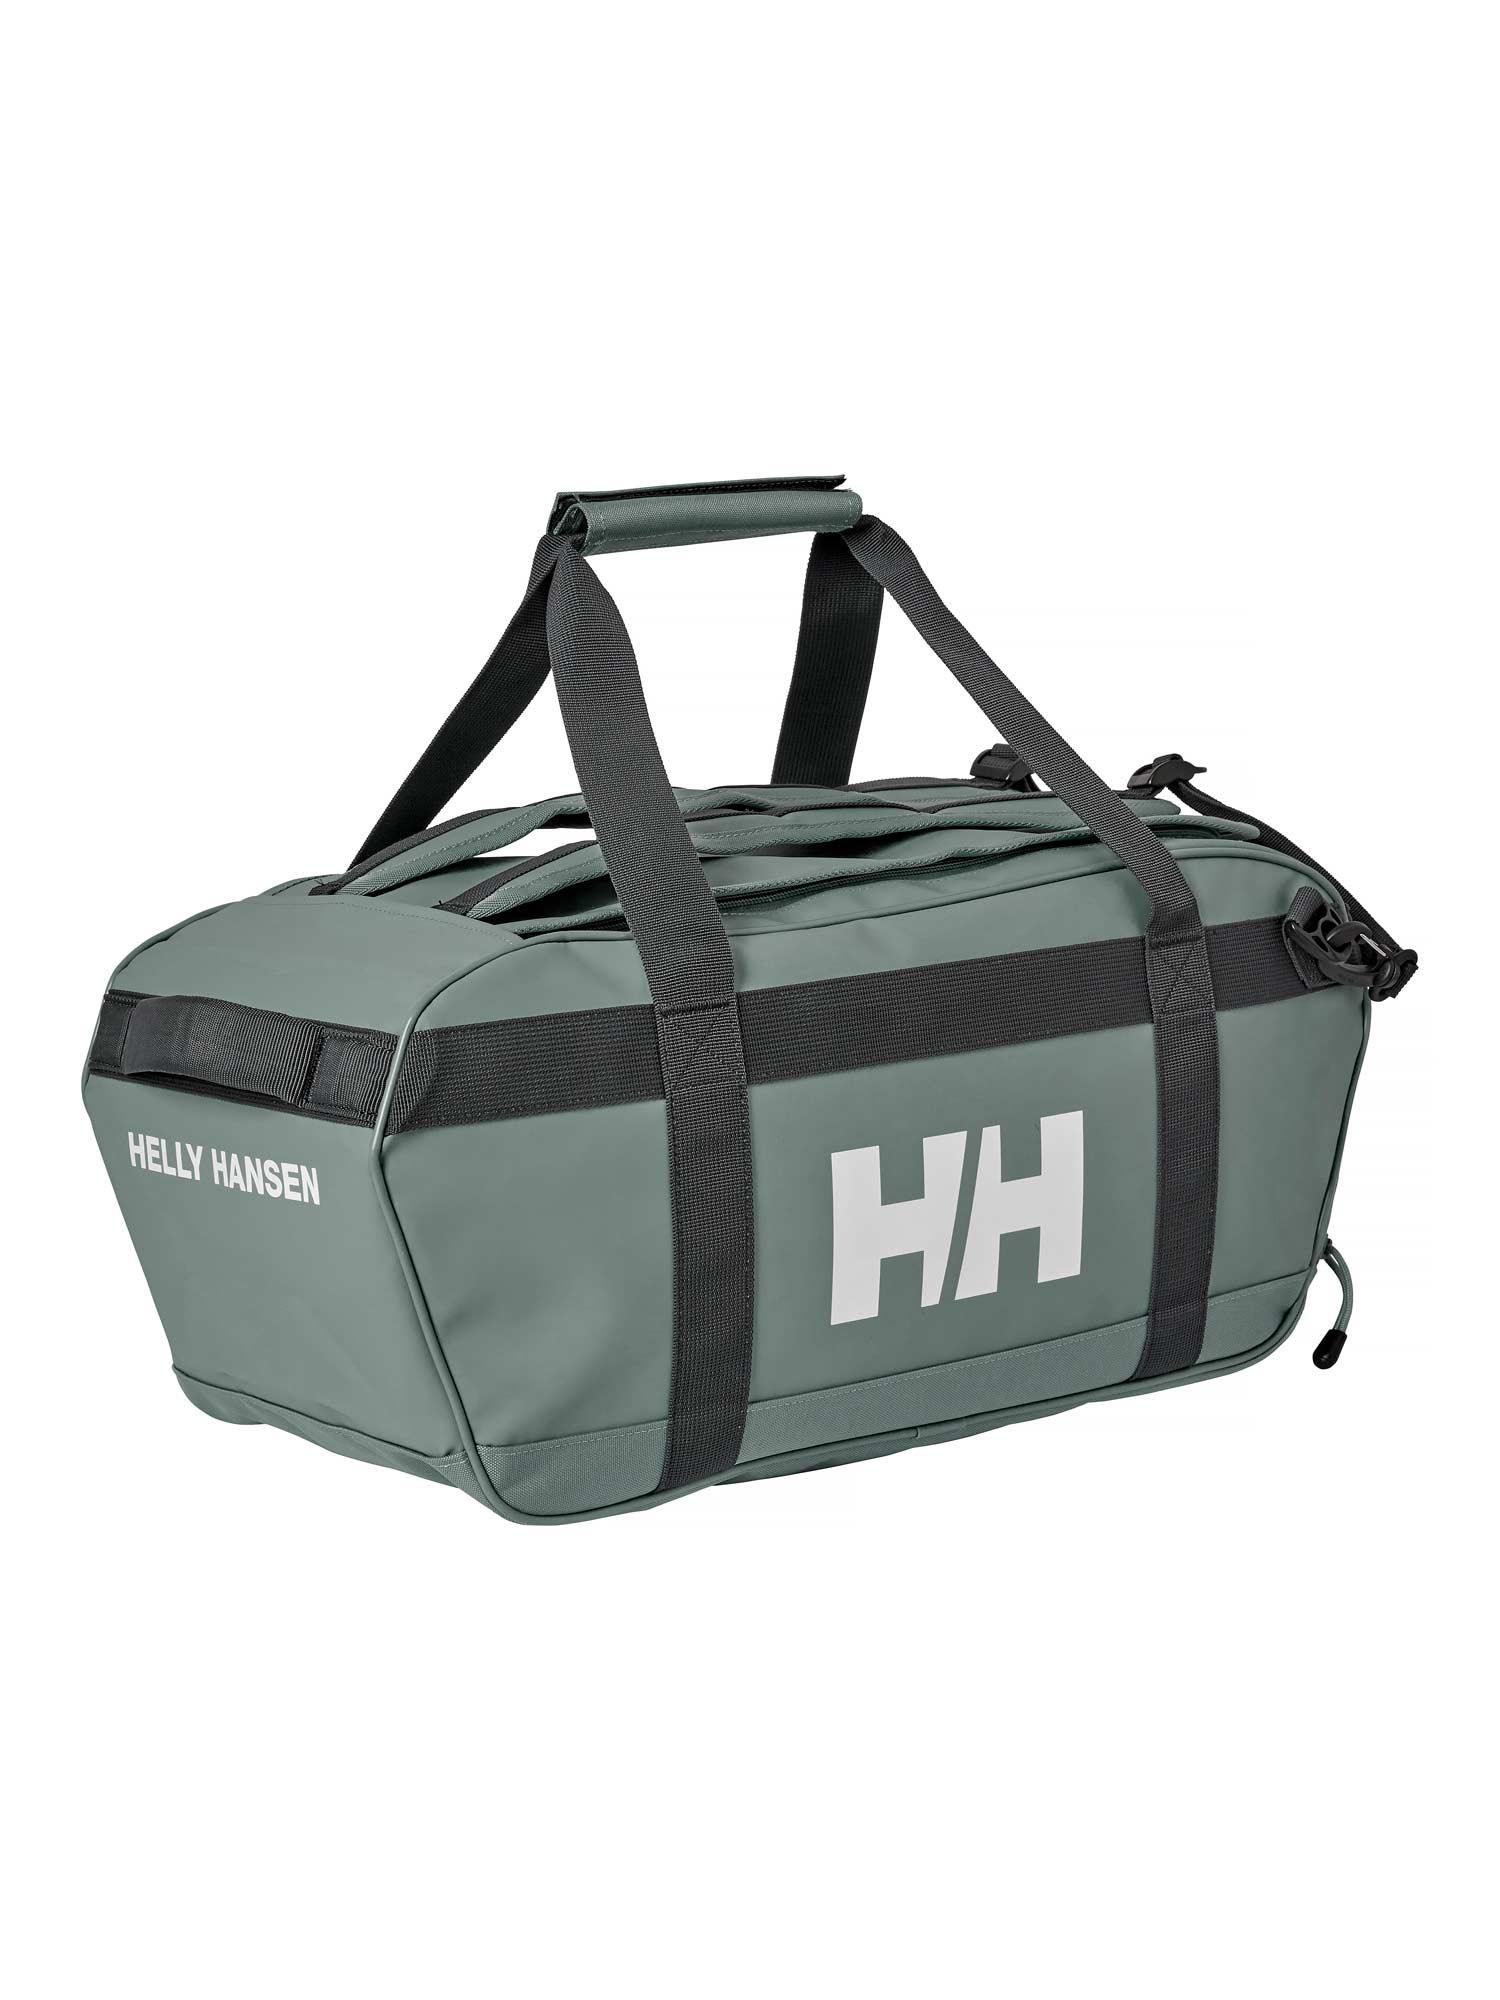 Selected image for HELLY HANSEN Torba na rame HH SCOUT S Duffel siva